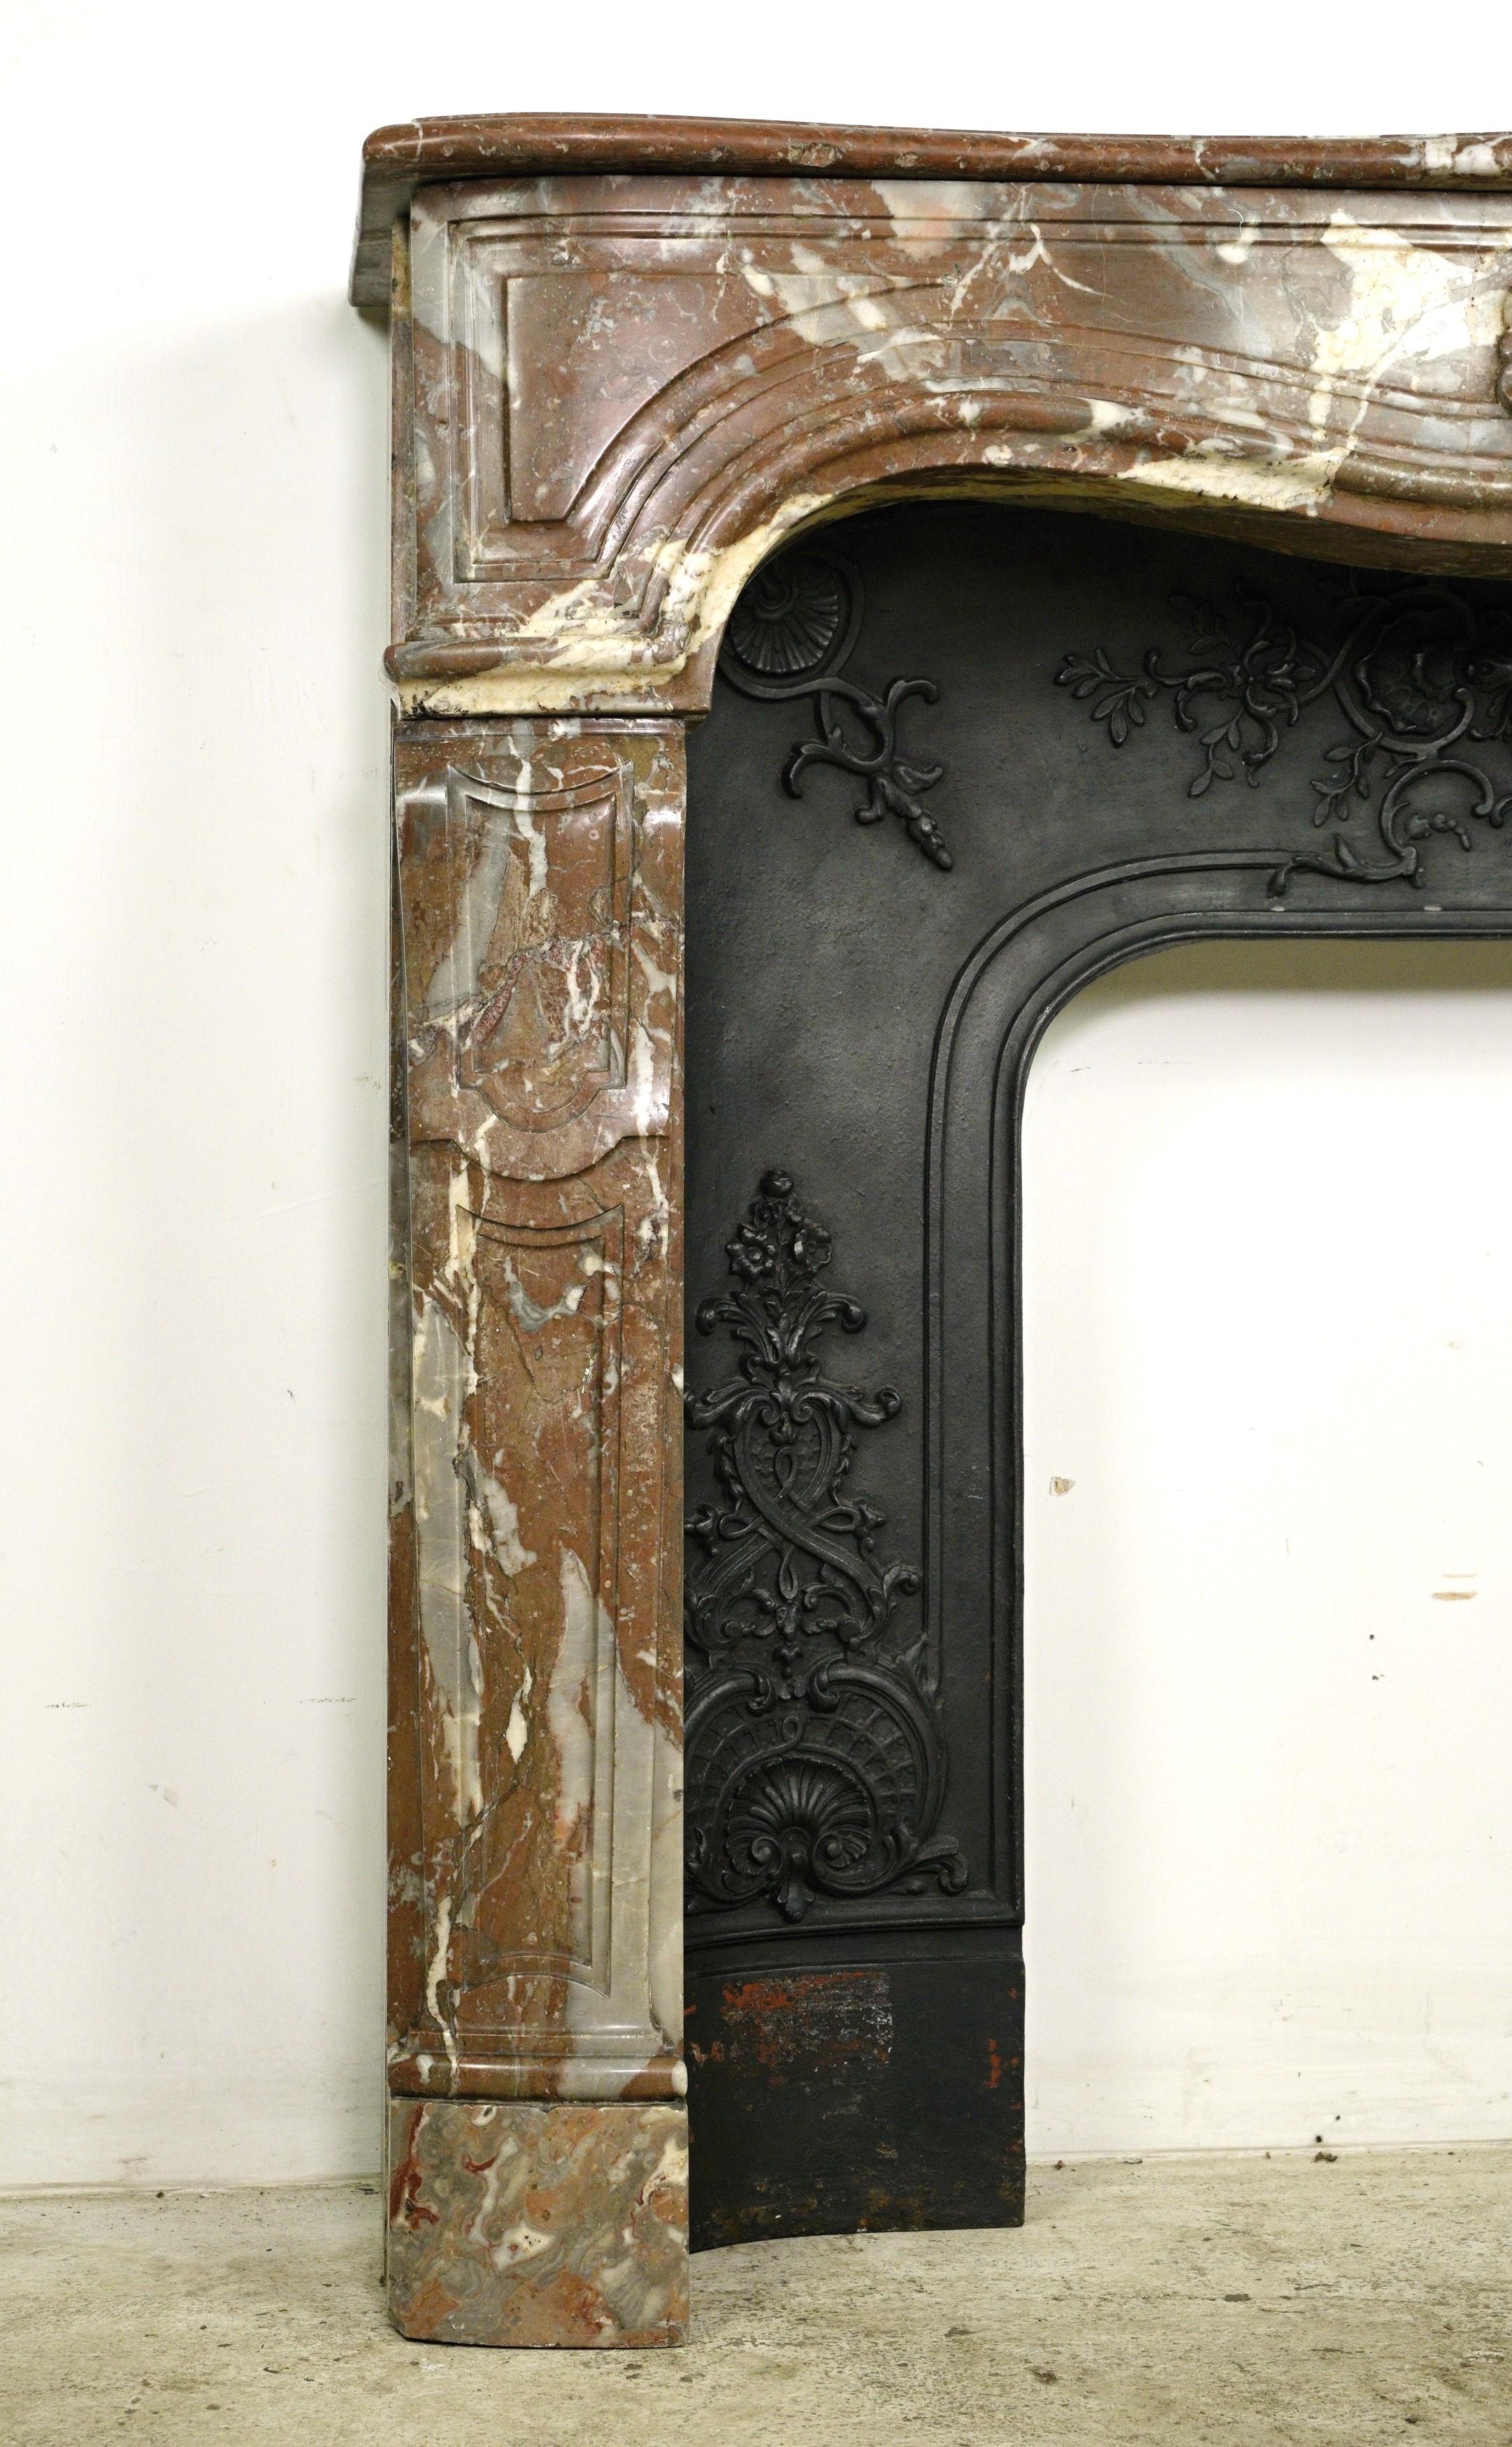 This piece was procured from an esteemed estate located in Greenwich, Connecticut. This rouge royale marble mantel features a serpentine design, showcasing unique and antique carvings. While the mantel itself is in good condition, with some minor